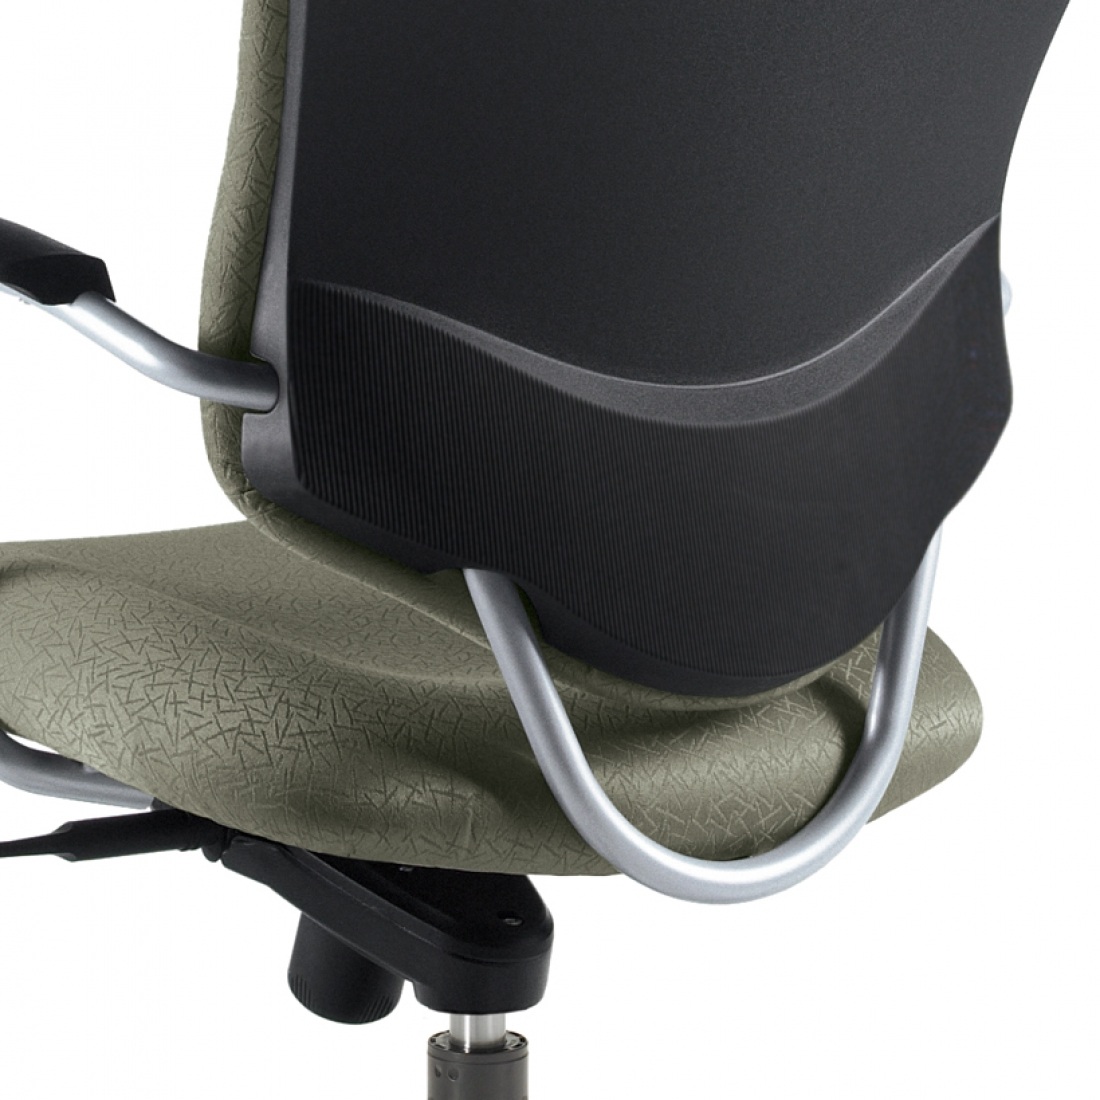 Supra Chairs Feature - Protective Outer Back